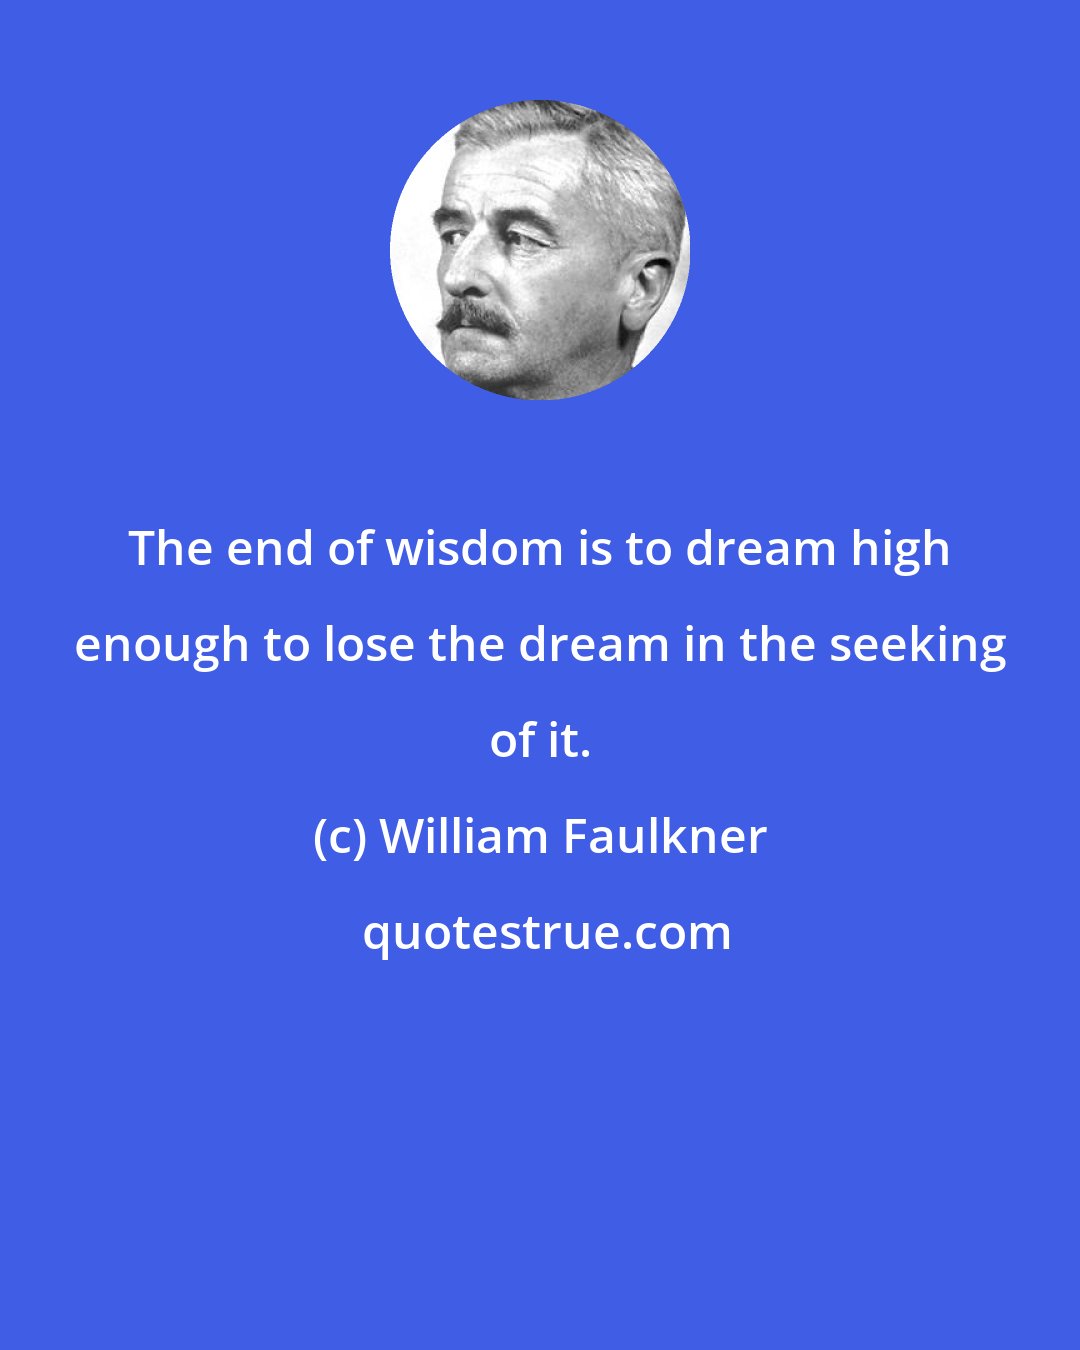 William Faulkner: The end of wisdom is to dream high enough to lose the dream in the seeking of it.